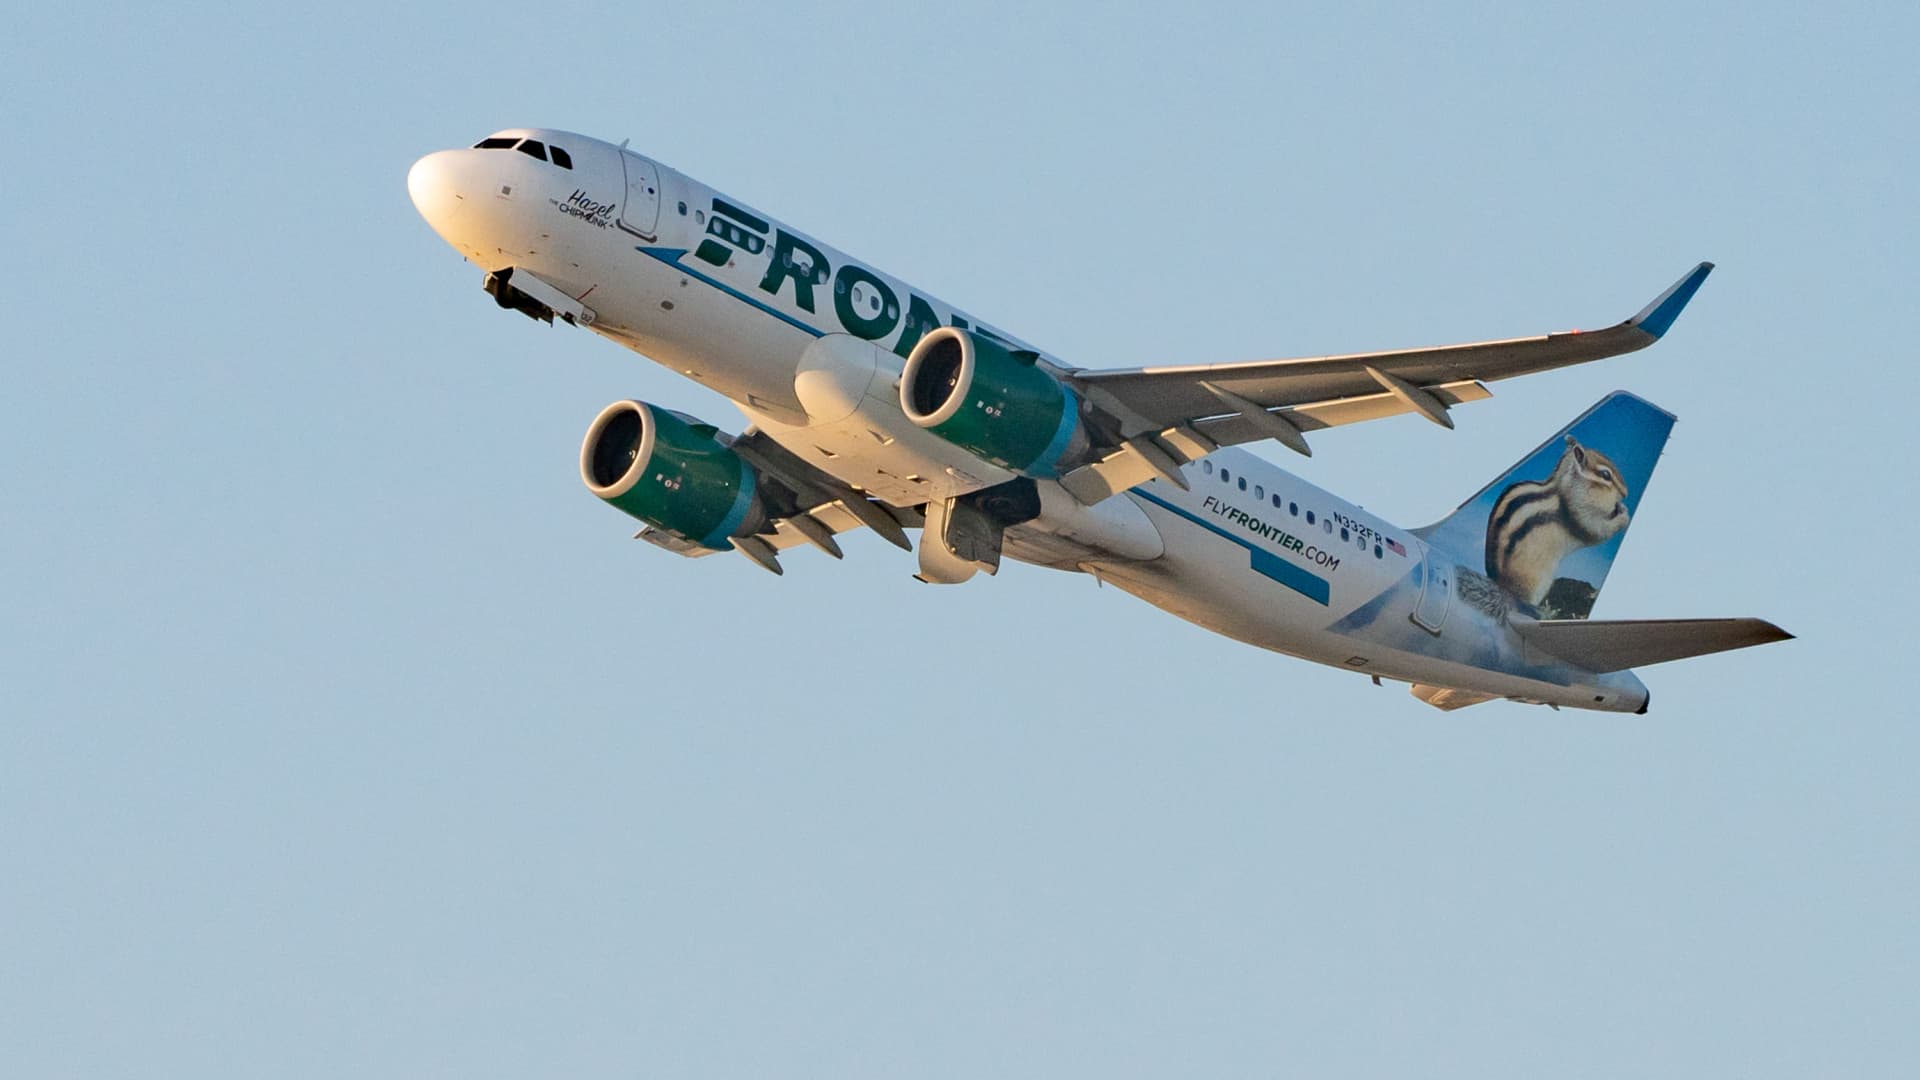 Frontier Airlines gets rid of telephone customer service
– News X